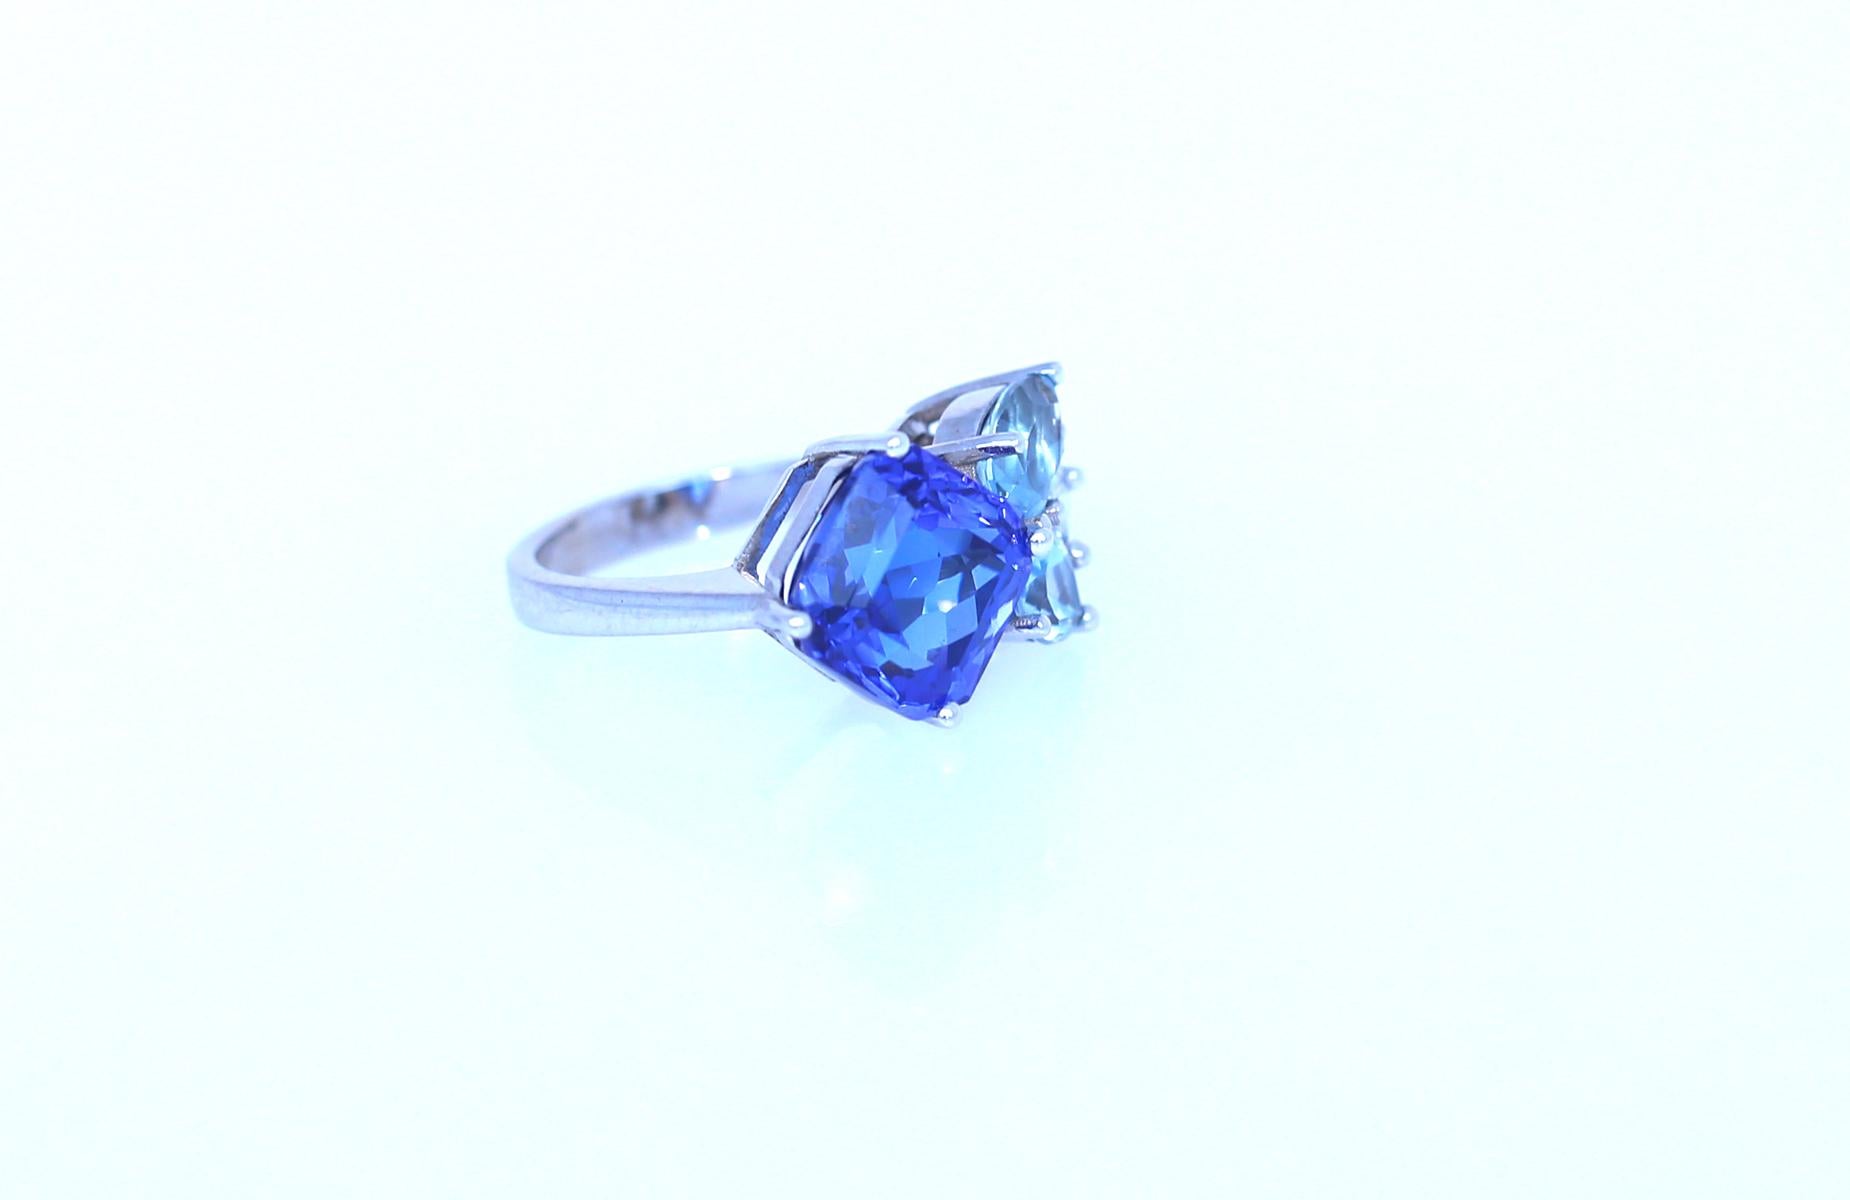 Tanzanite Diamond Ring 14K White Gold. Created in  2023.

6.8 Carats of fine Tanzanite and approximately 0.4 Carats of fine  Diamond. Superb design with amazing color grading from deep blue to light blue to clear white Diamonds. 
Stamped on the